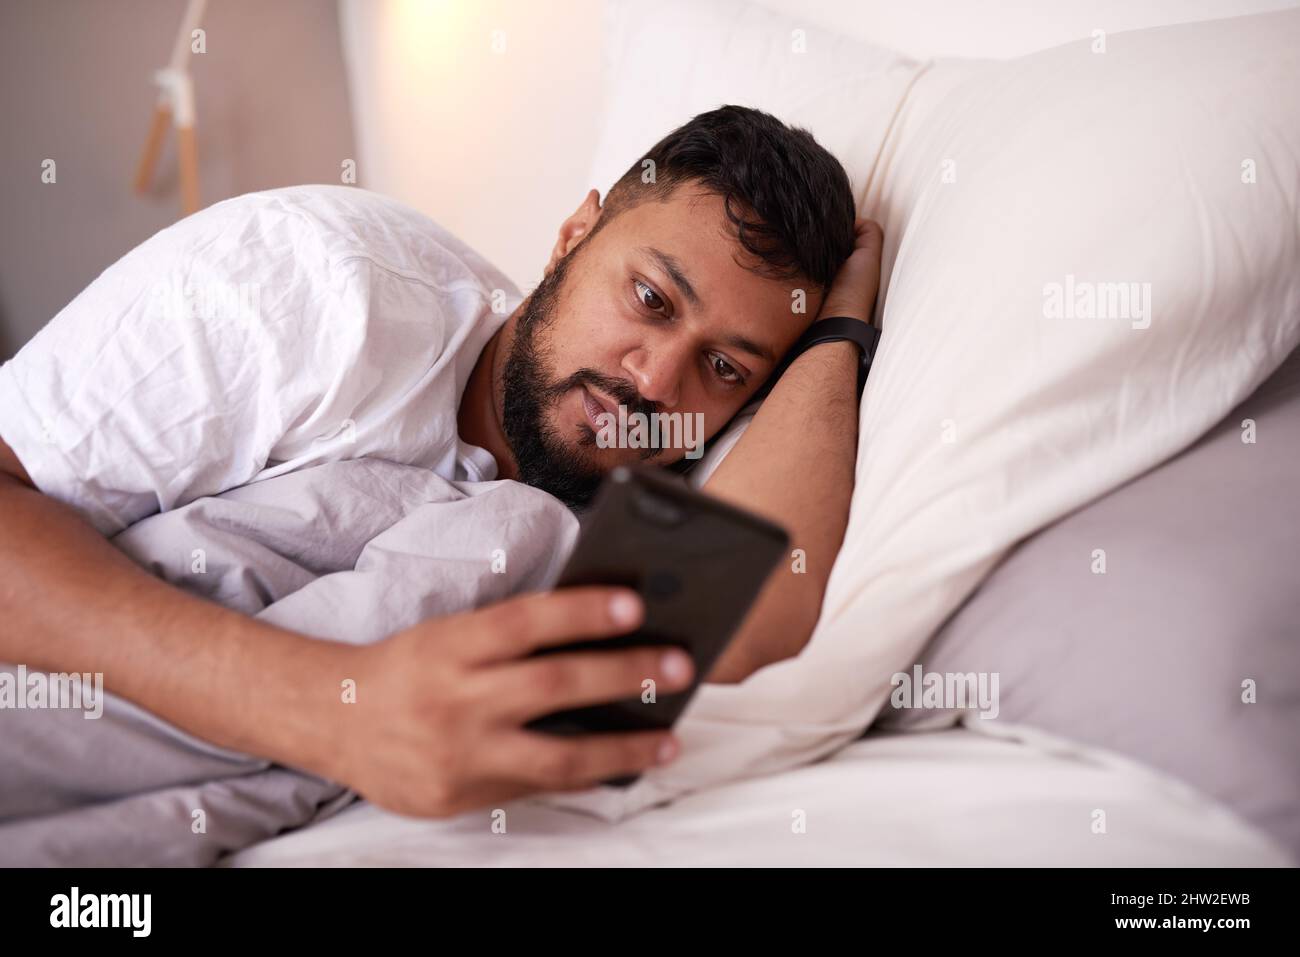 A man looking at his mobile phone while lying in bed Stock Photo